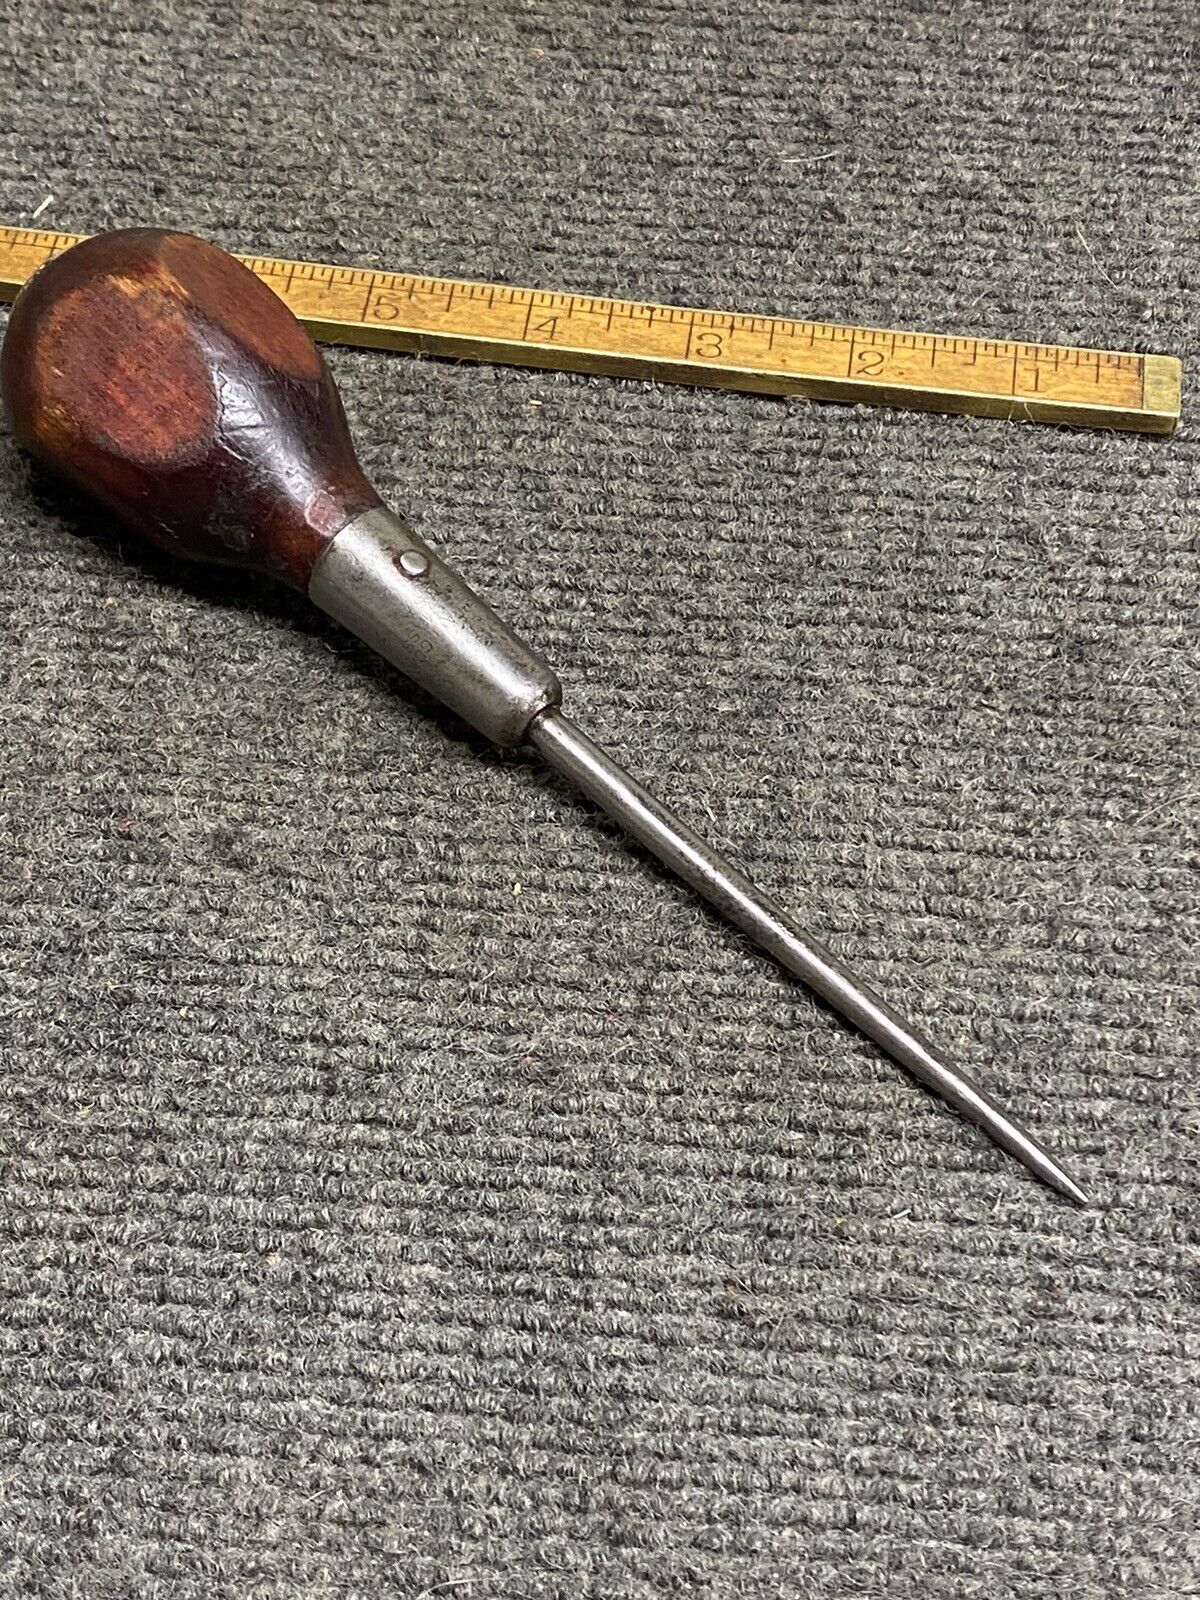 Rare Vintage Goodell Pratt Scratch Awl With Wooden Pentagon Shaped Handle No. 40